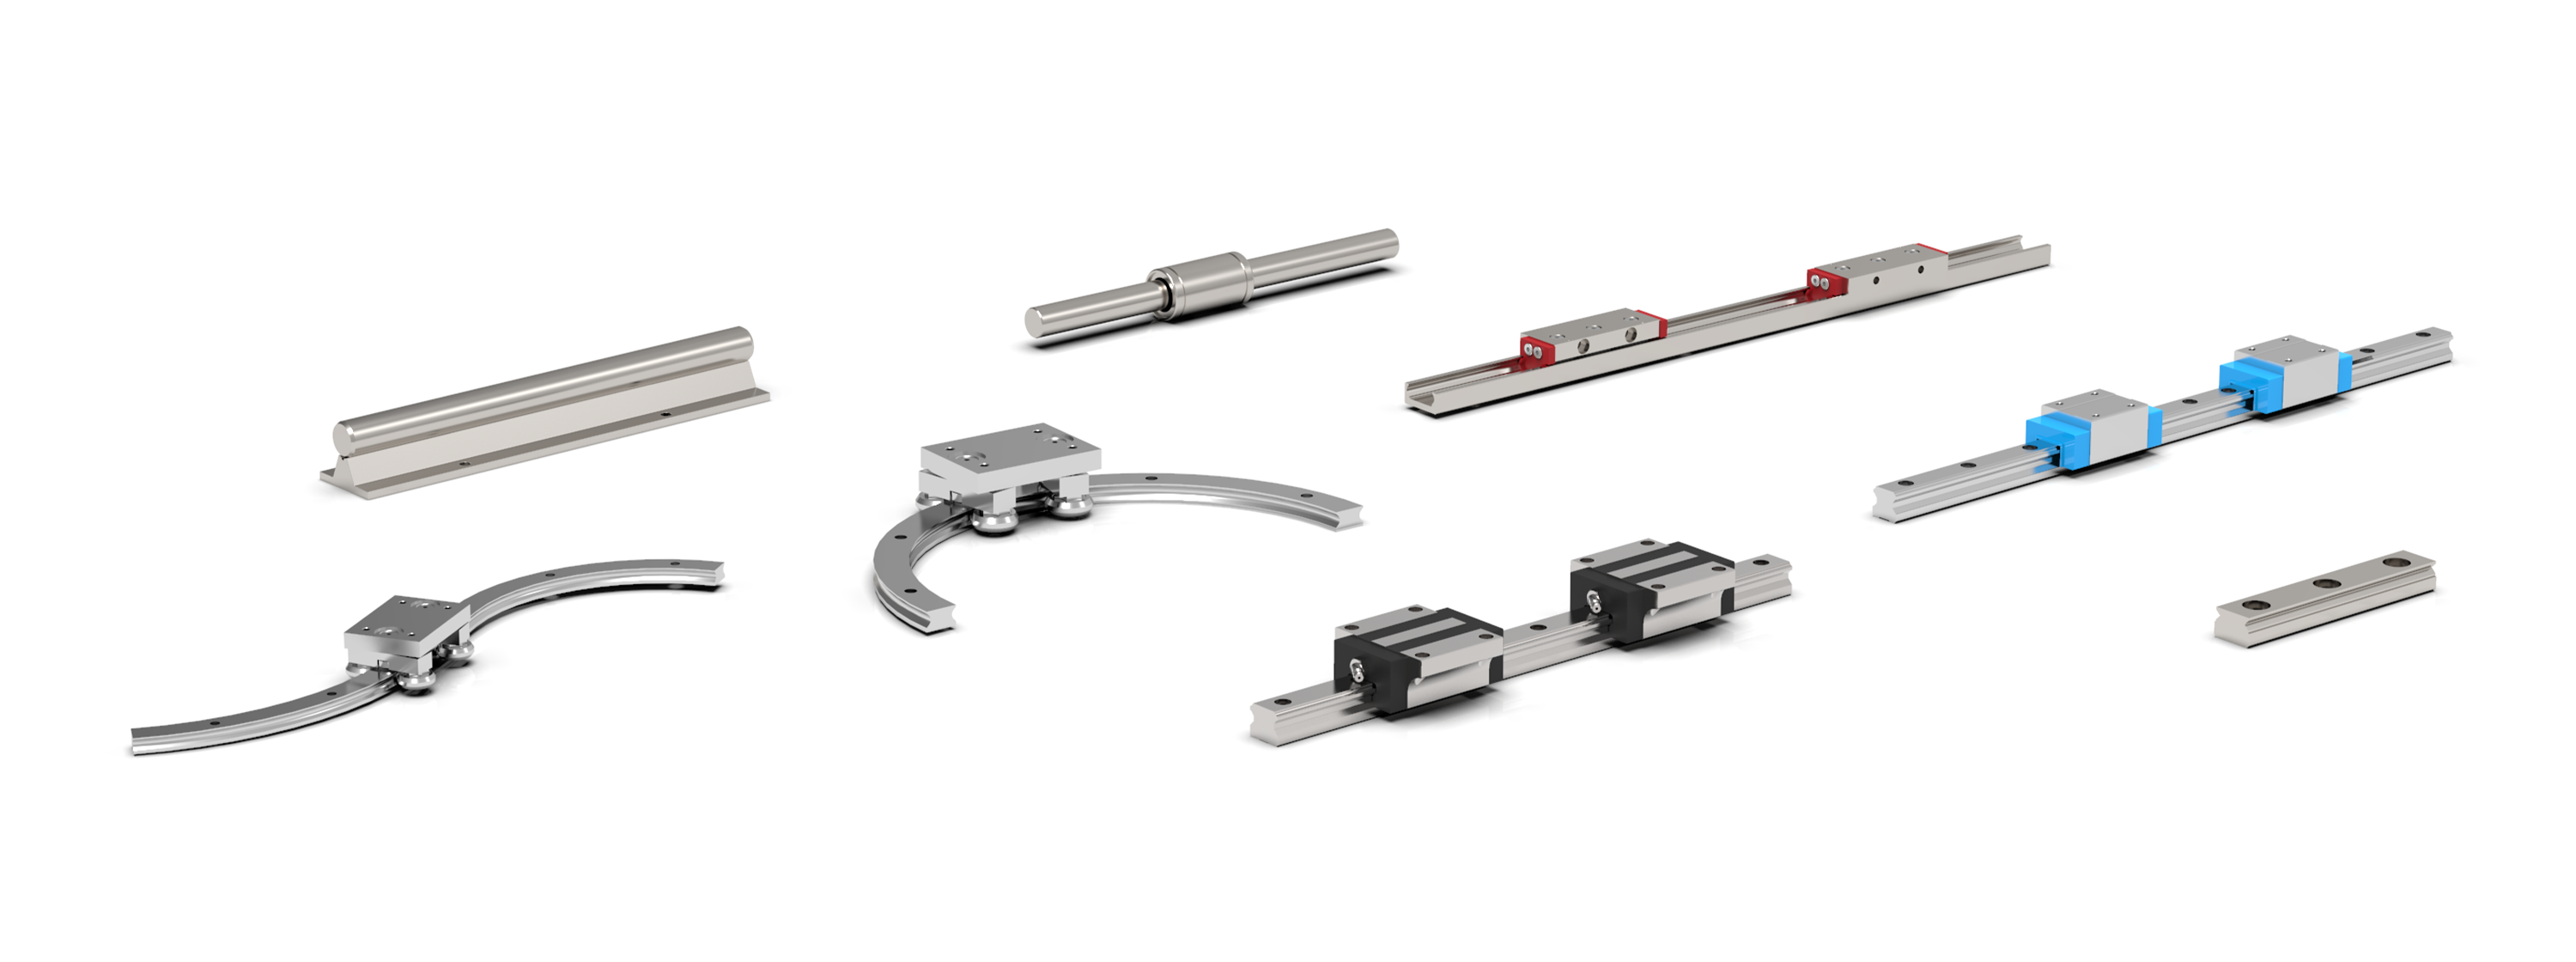 Automotion Components is a leading supplier of linear motion products and components